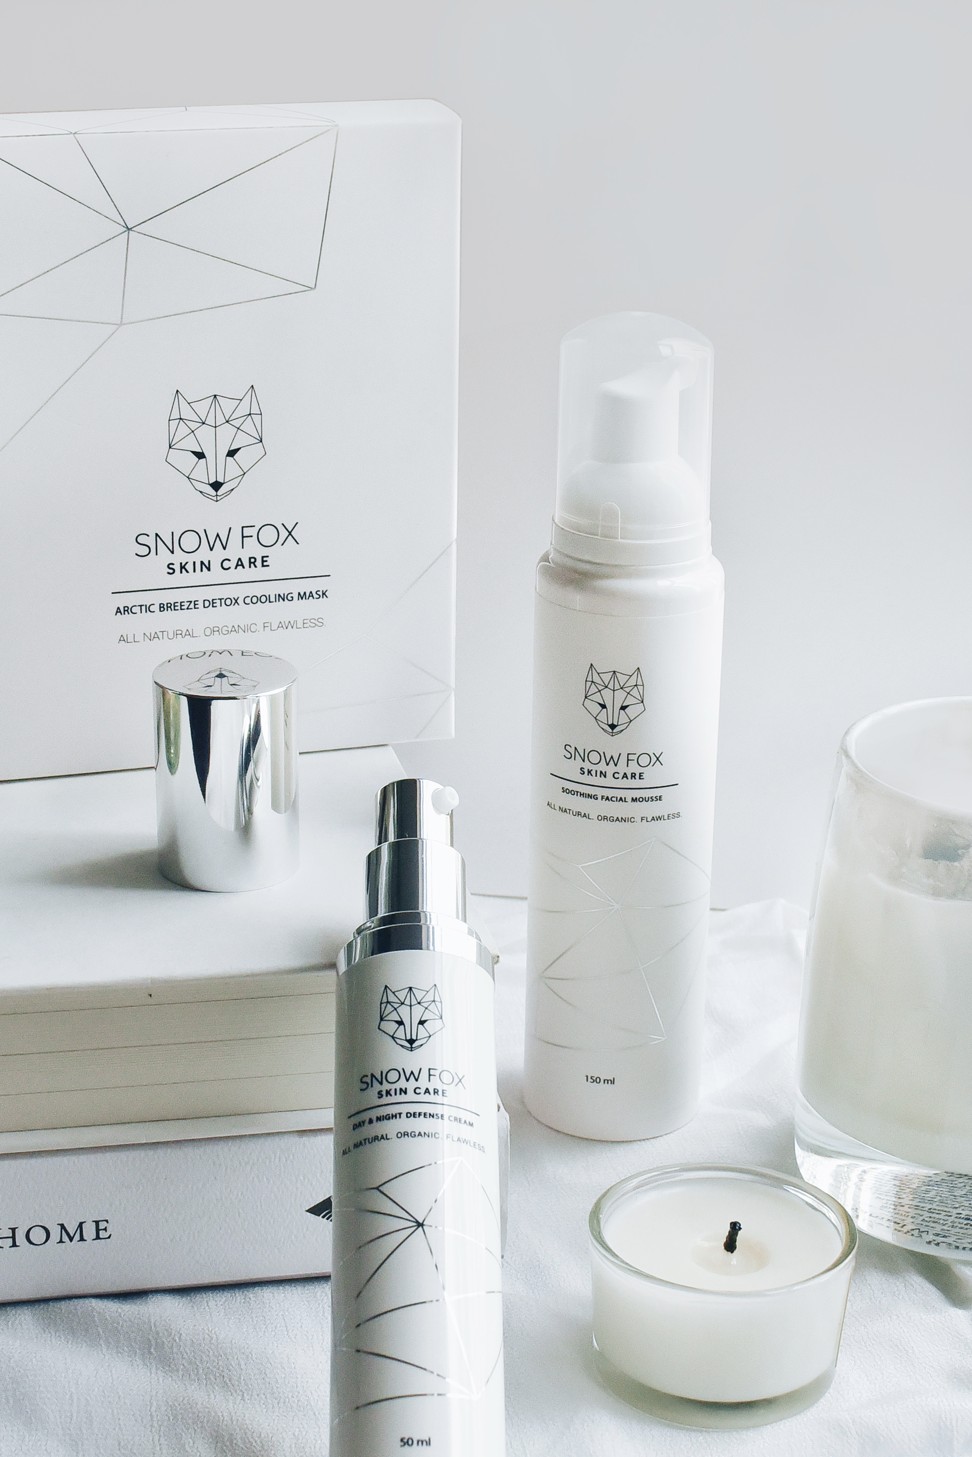 Snowfox skincare collection is aimed at sensitive skin types.